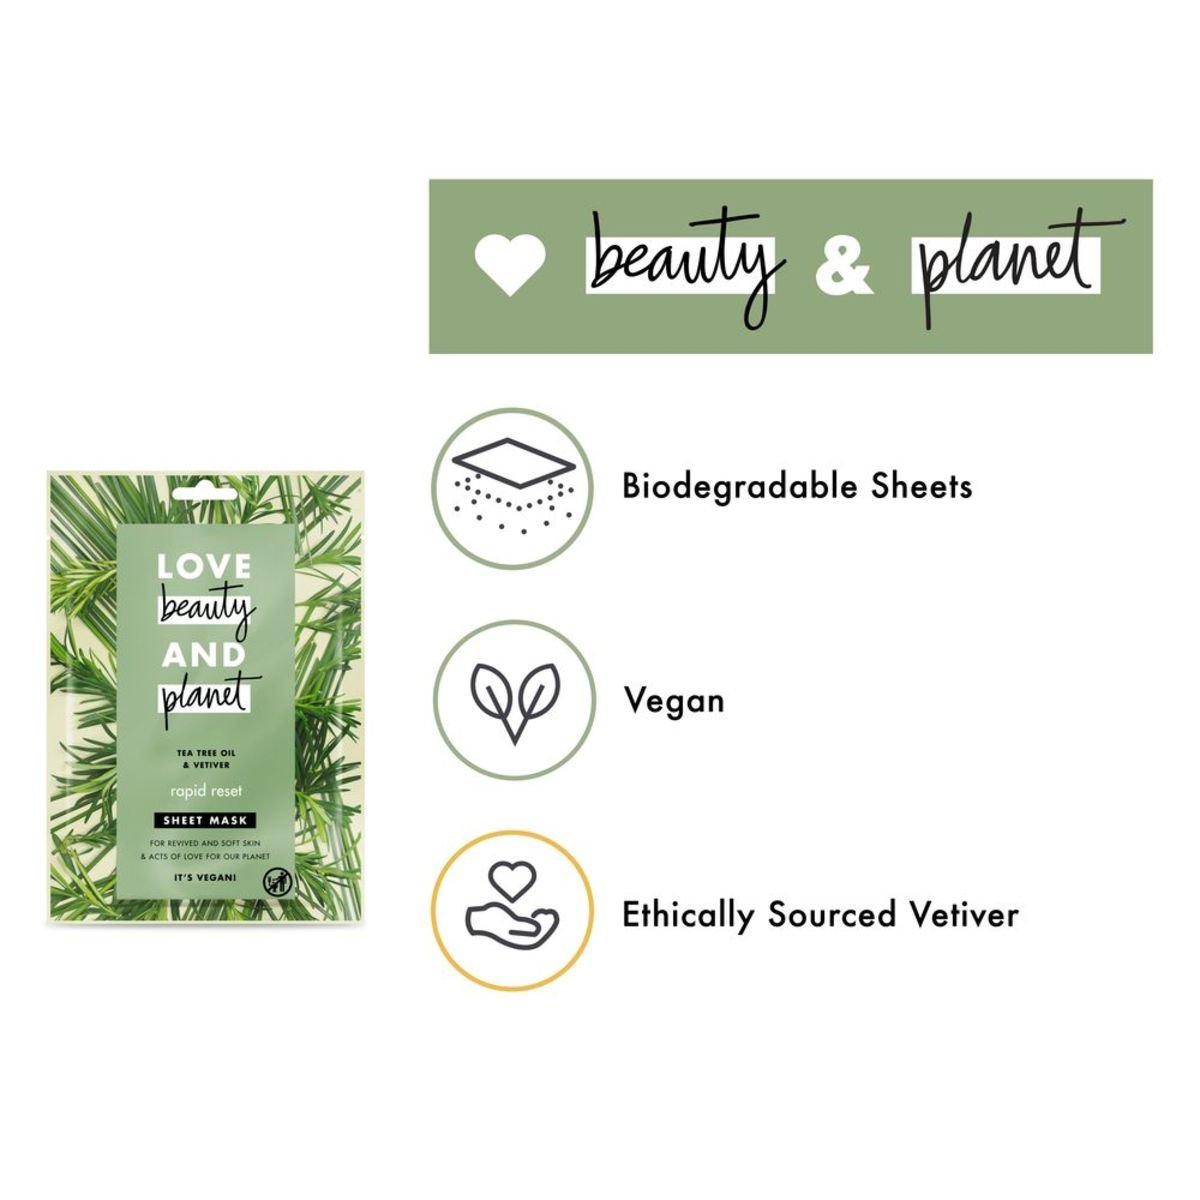 Love Beauty and Planet Sheet Mask Rapid Reset Tea Tree Oil & Vetiver 1 pc